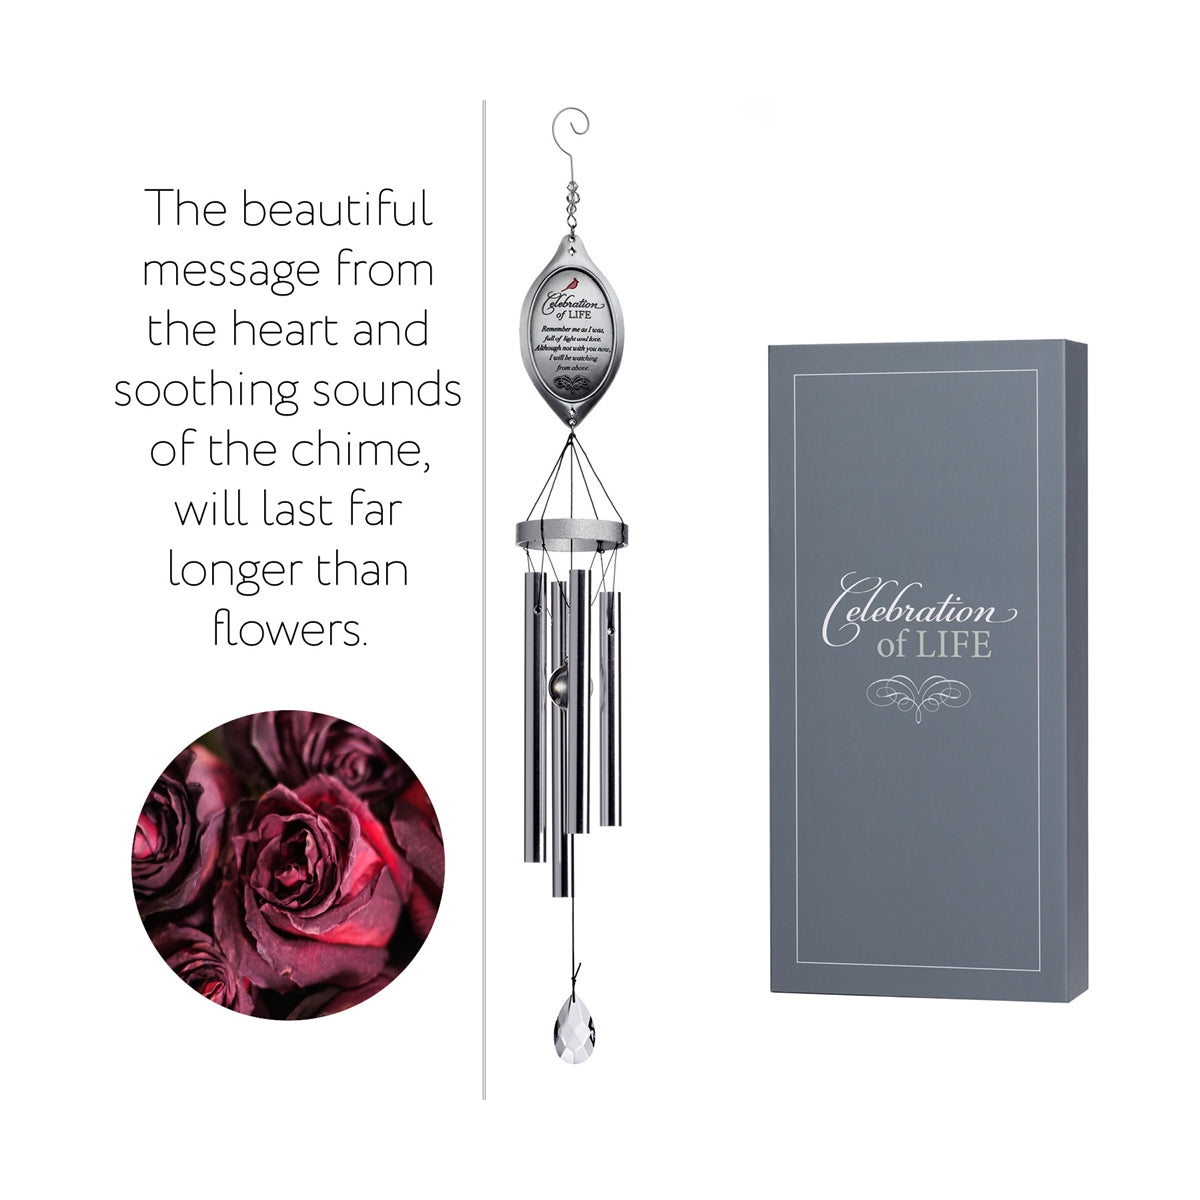 The celebration of life windchime has a beautiful message from the heart and soothing sounds of the chime will last far longer than flowers.